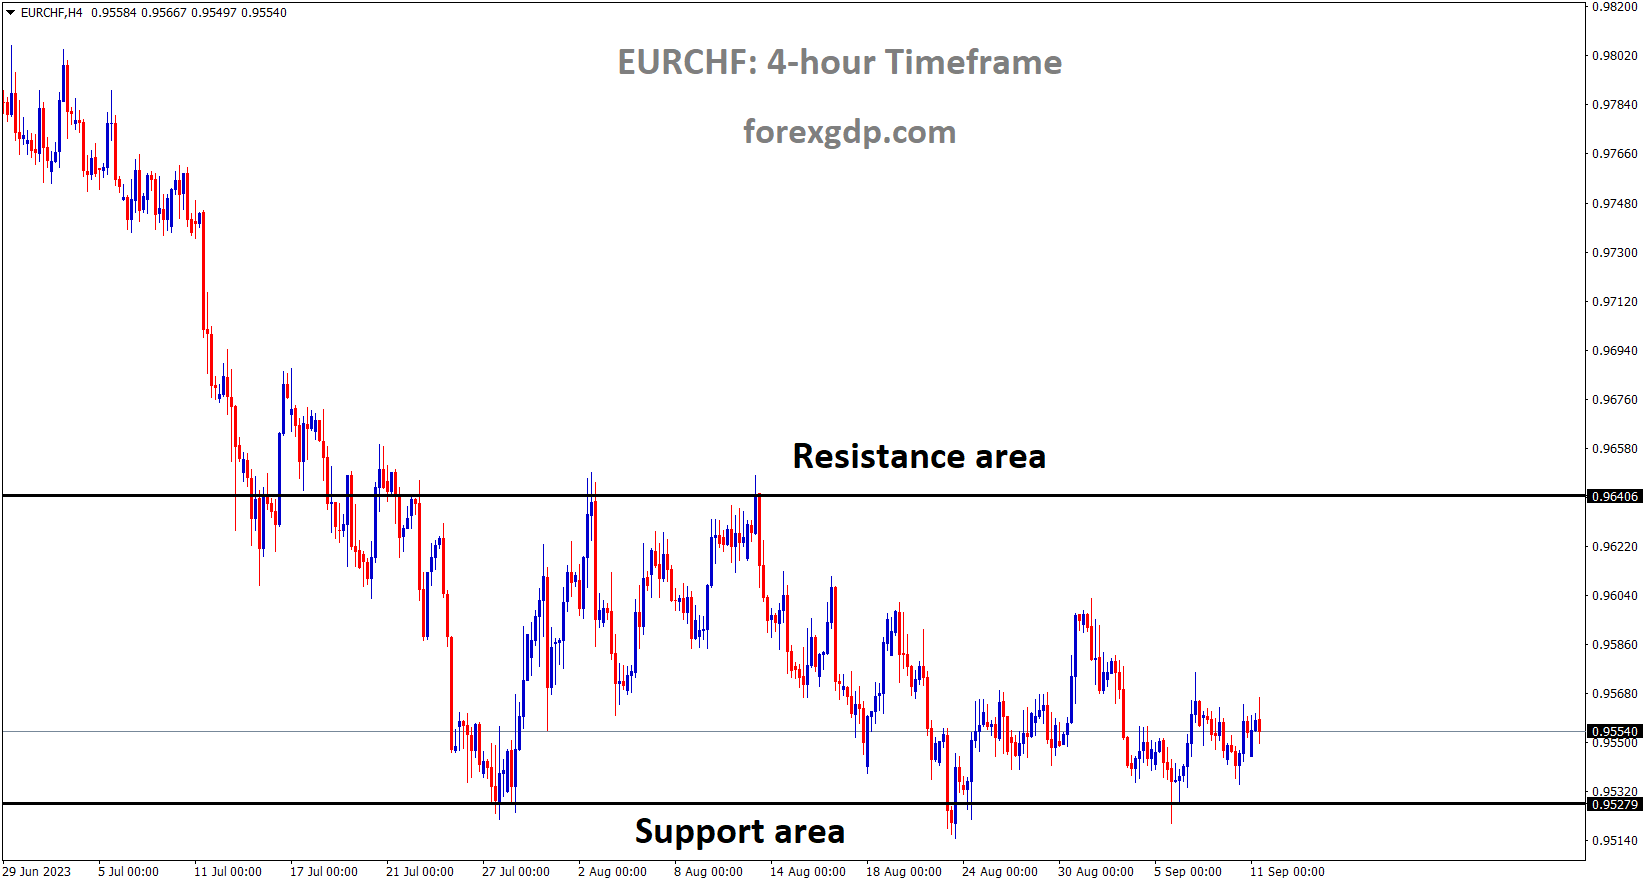 EURCHF is moving in the Box pattern and the market has rebounded from the horizontal support area of the pattern